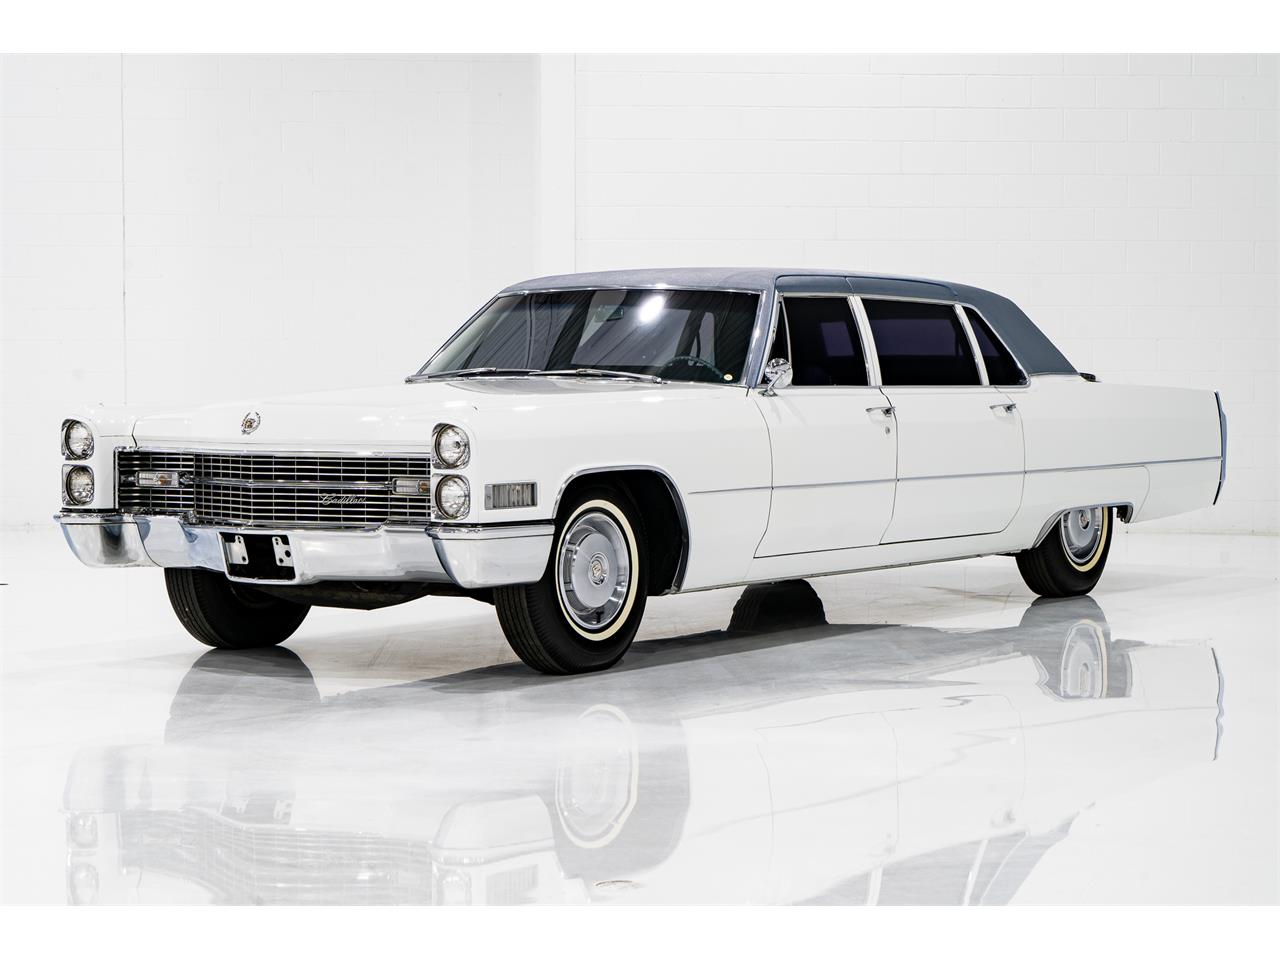 1966 Cadillac Fleetwood Limousine in Montreal, Quebec